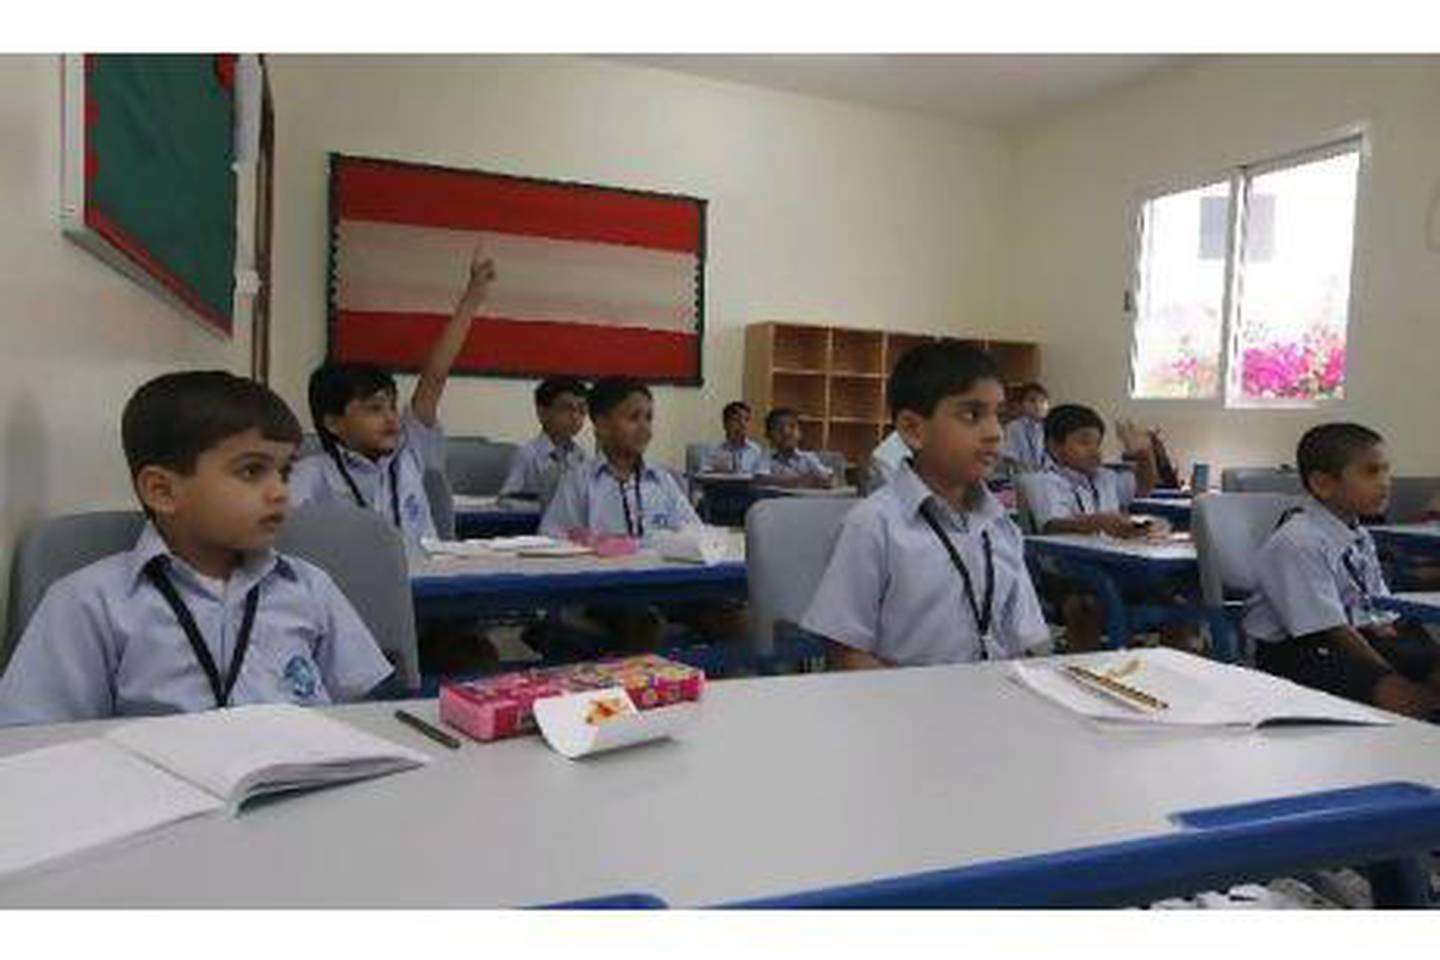 Pupils during a lesson at JSS Private School in Dubai. Jeffrey E Biteng / The National